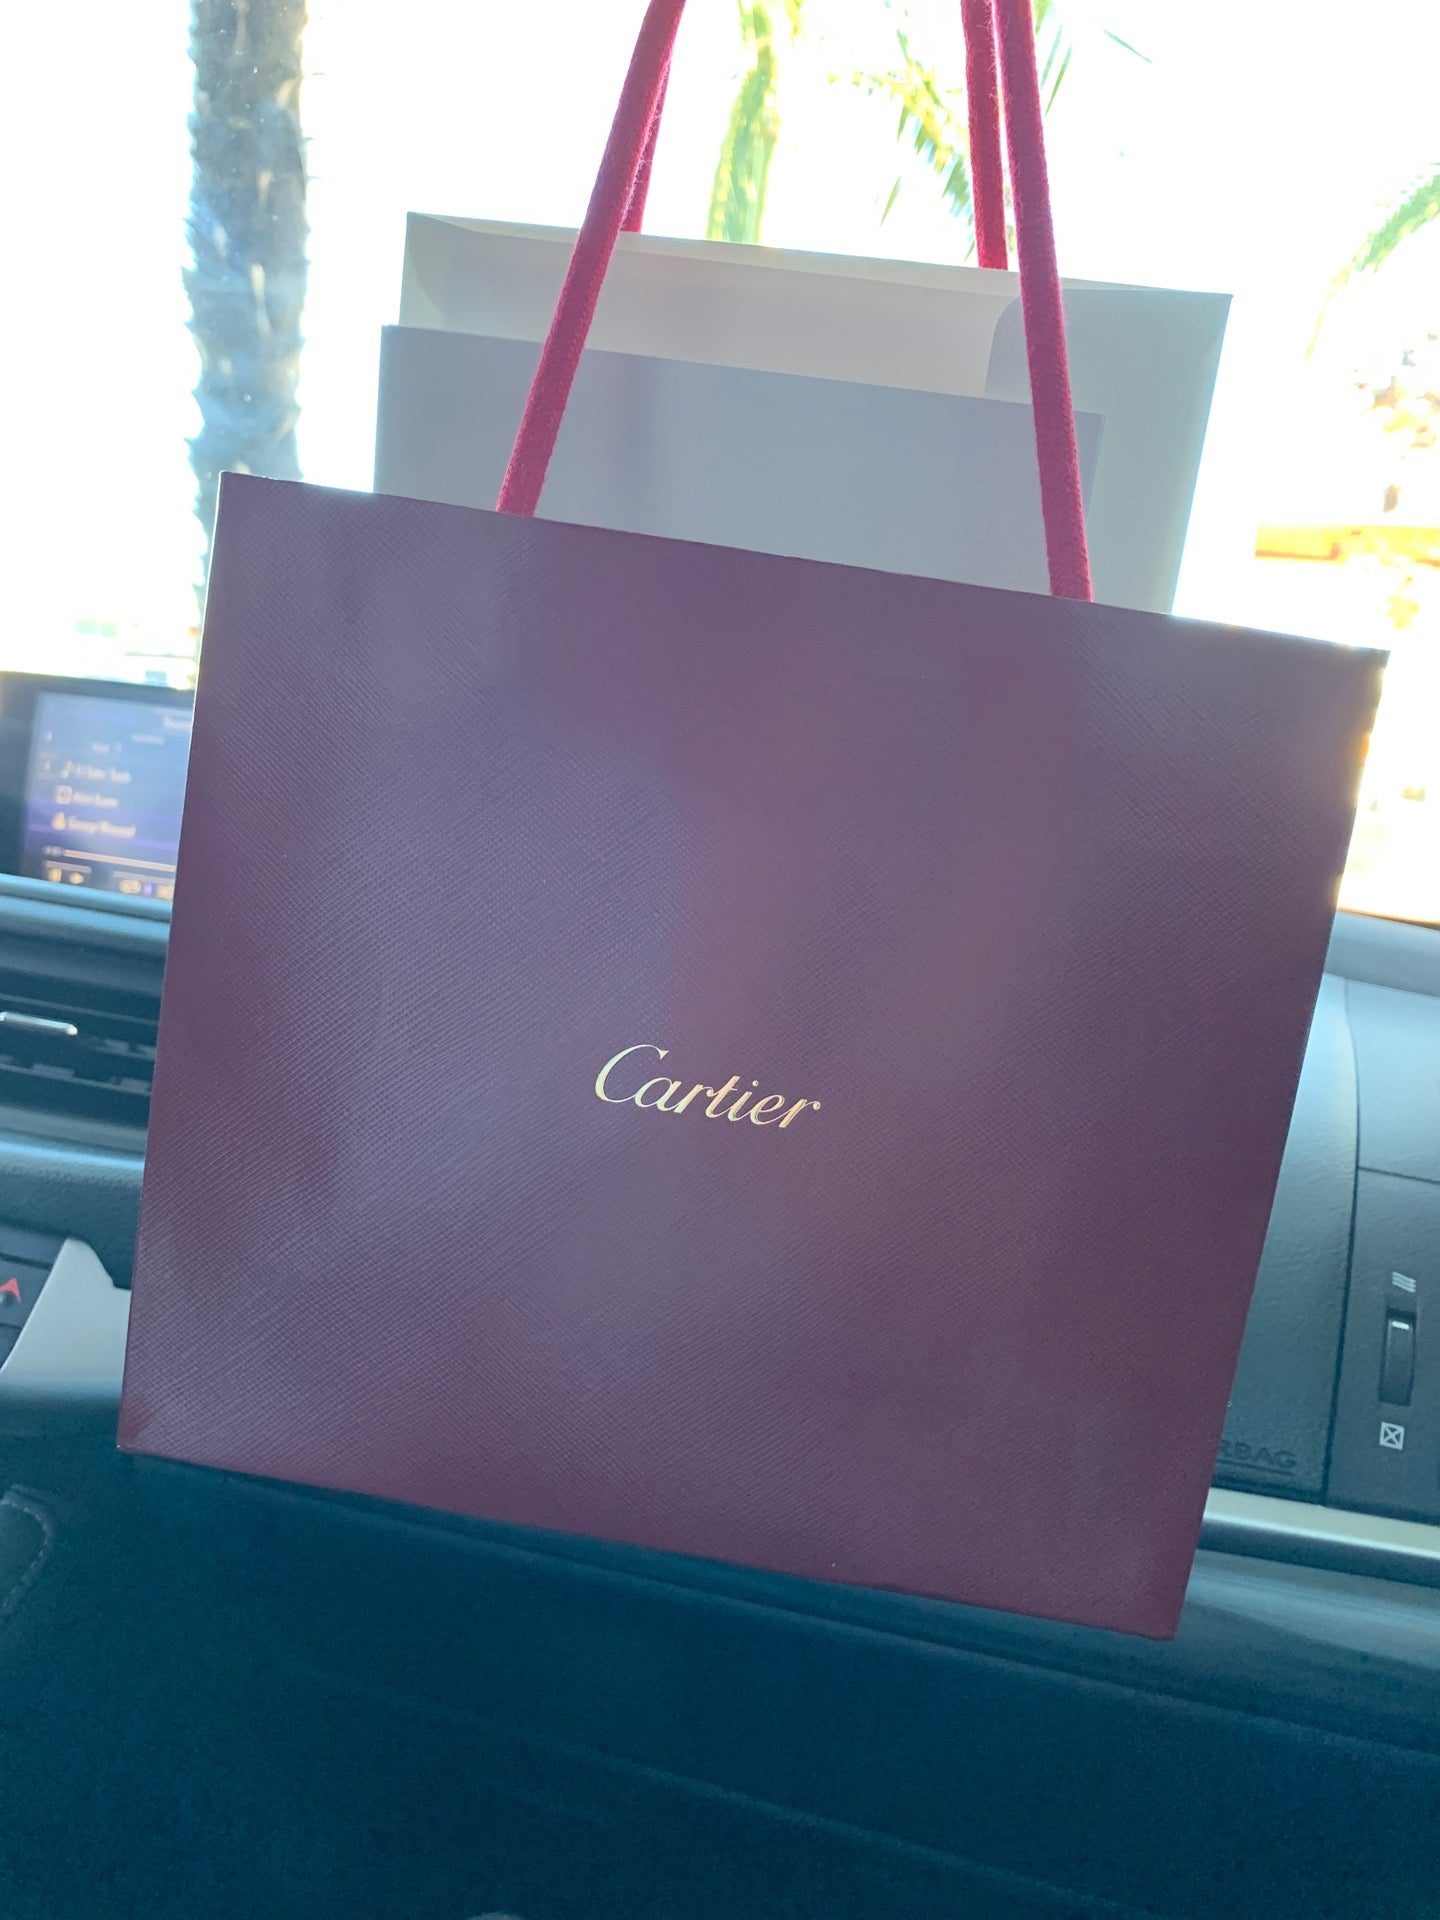 Cartier: fine jewelry, watches, accessories at 7007 Friars Road - Cartier